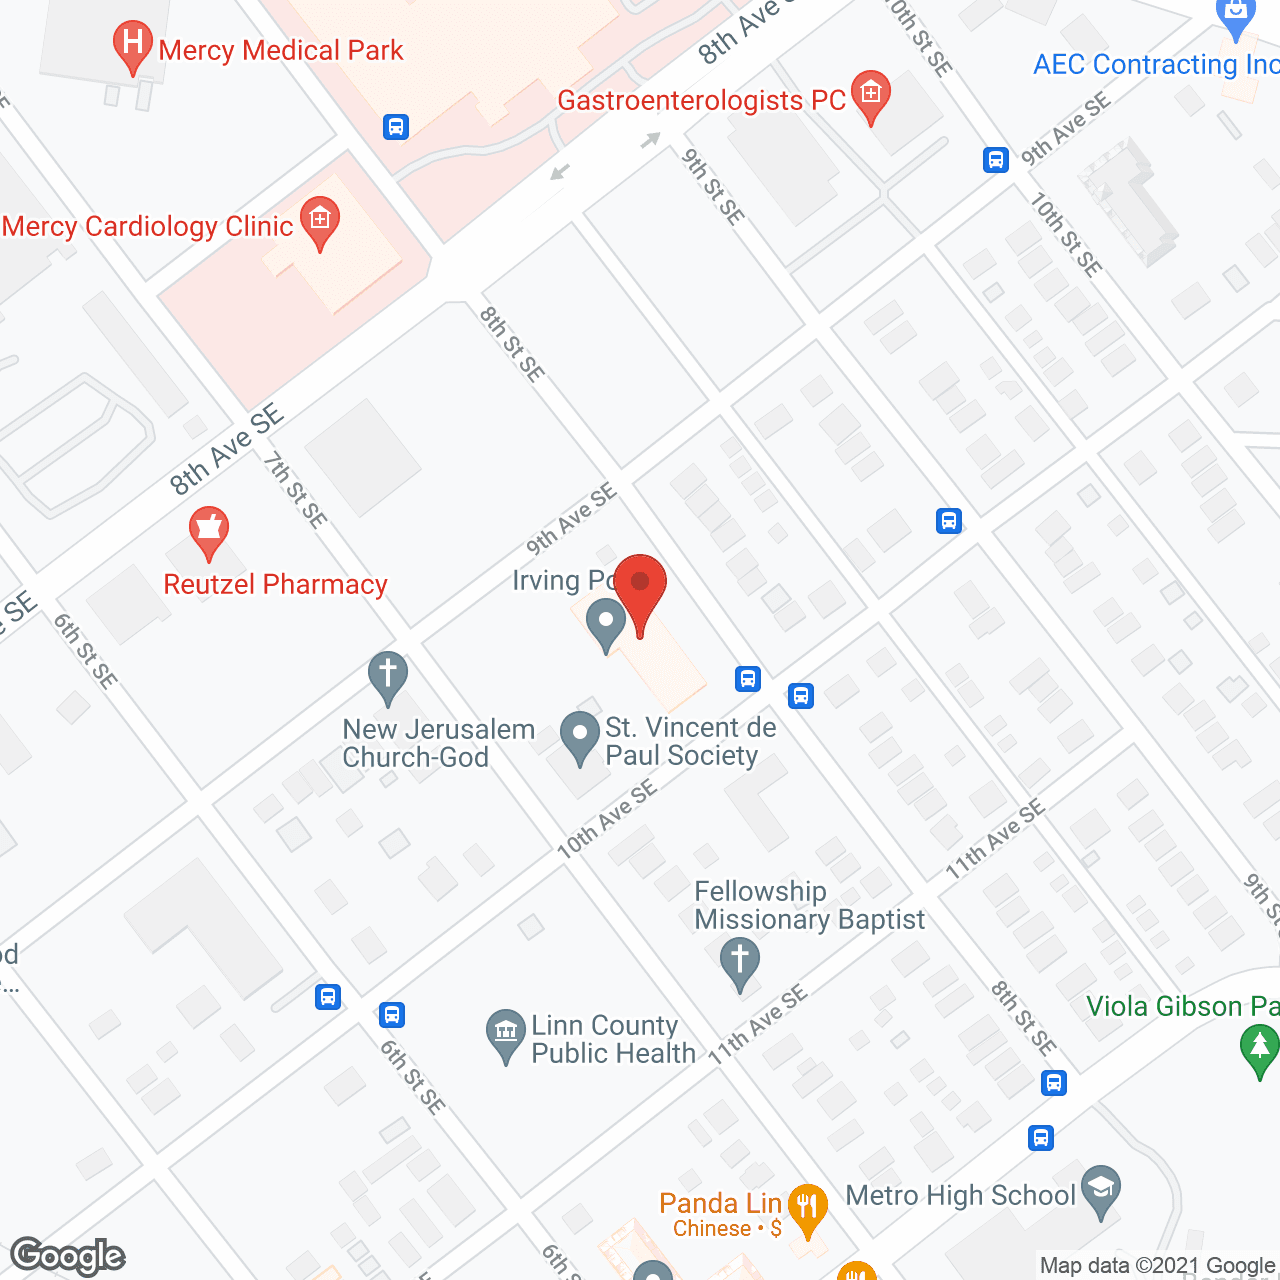 Irving Point in google map